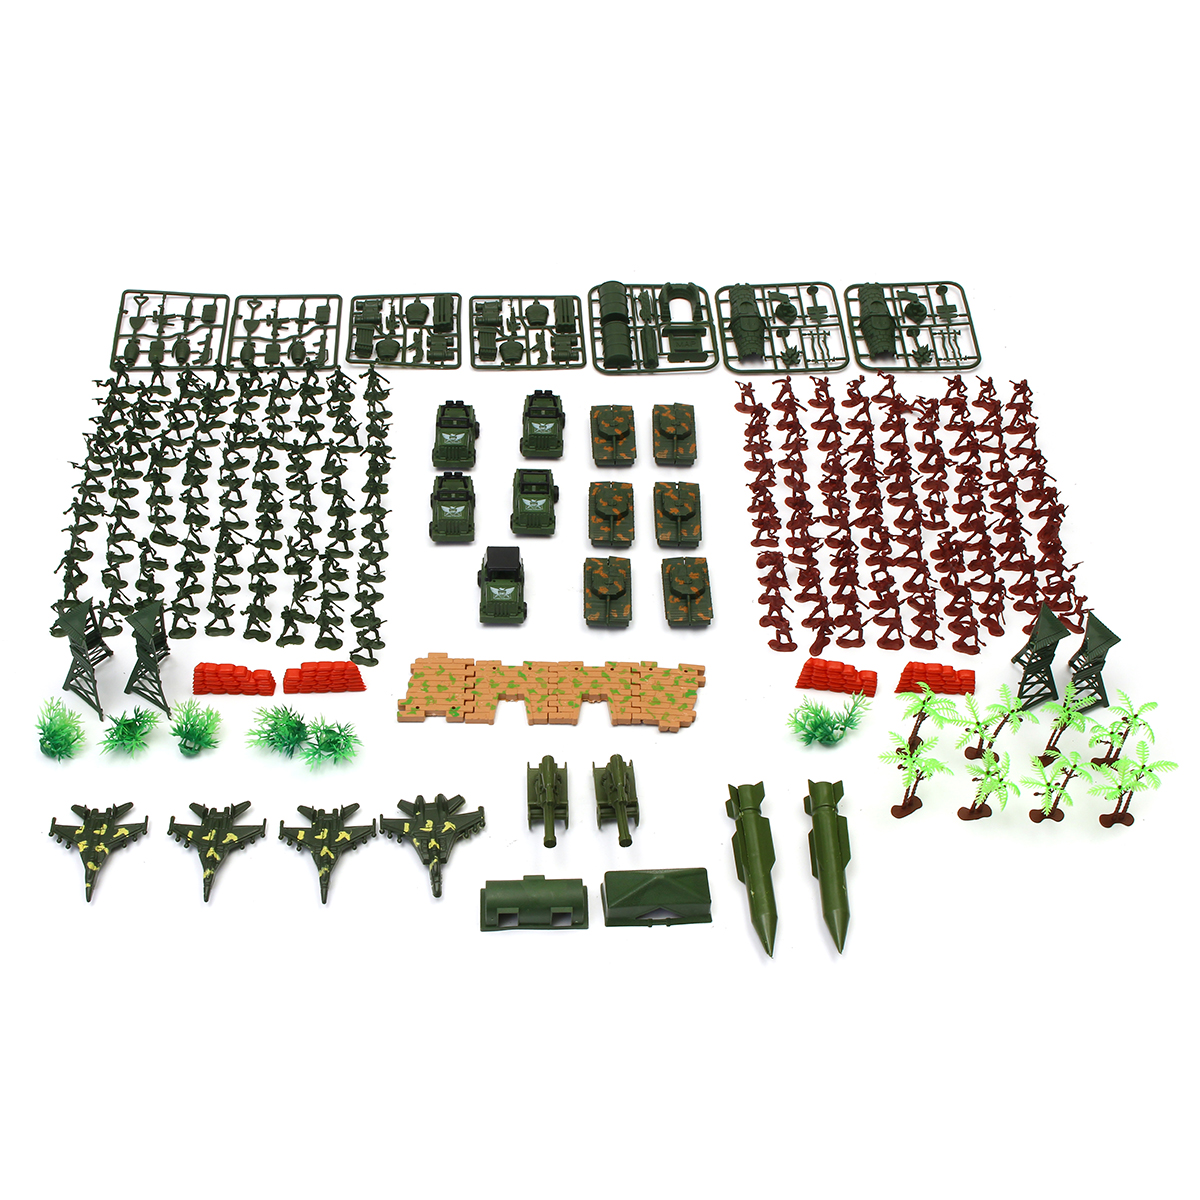 

328Pcs Plastic Soldiers Army Military Model DIY War Scene Kids Toys Set Gifts